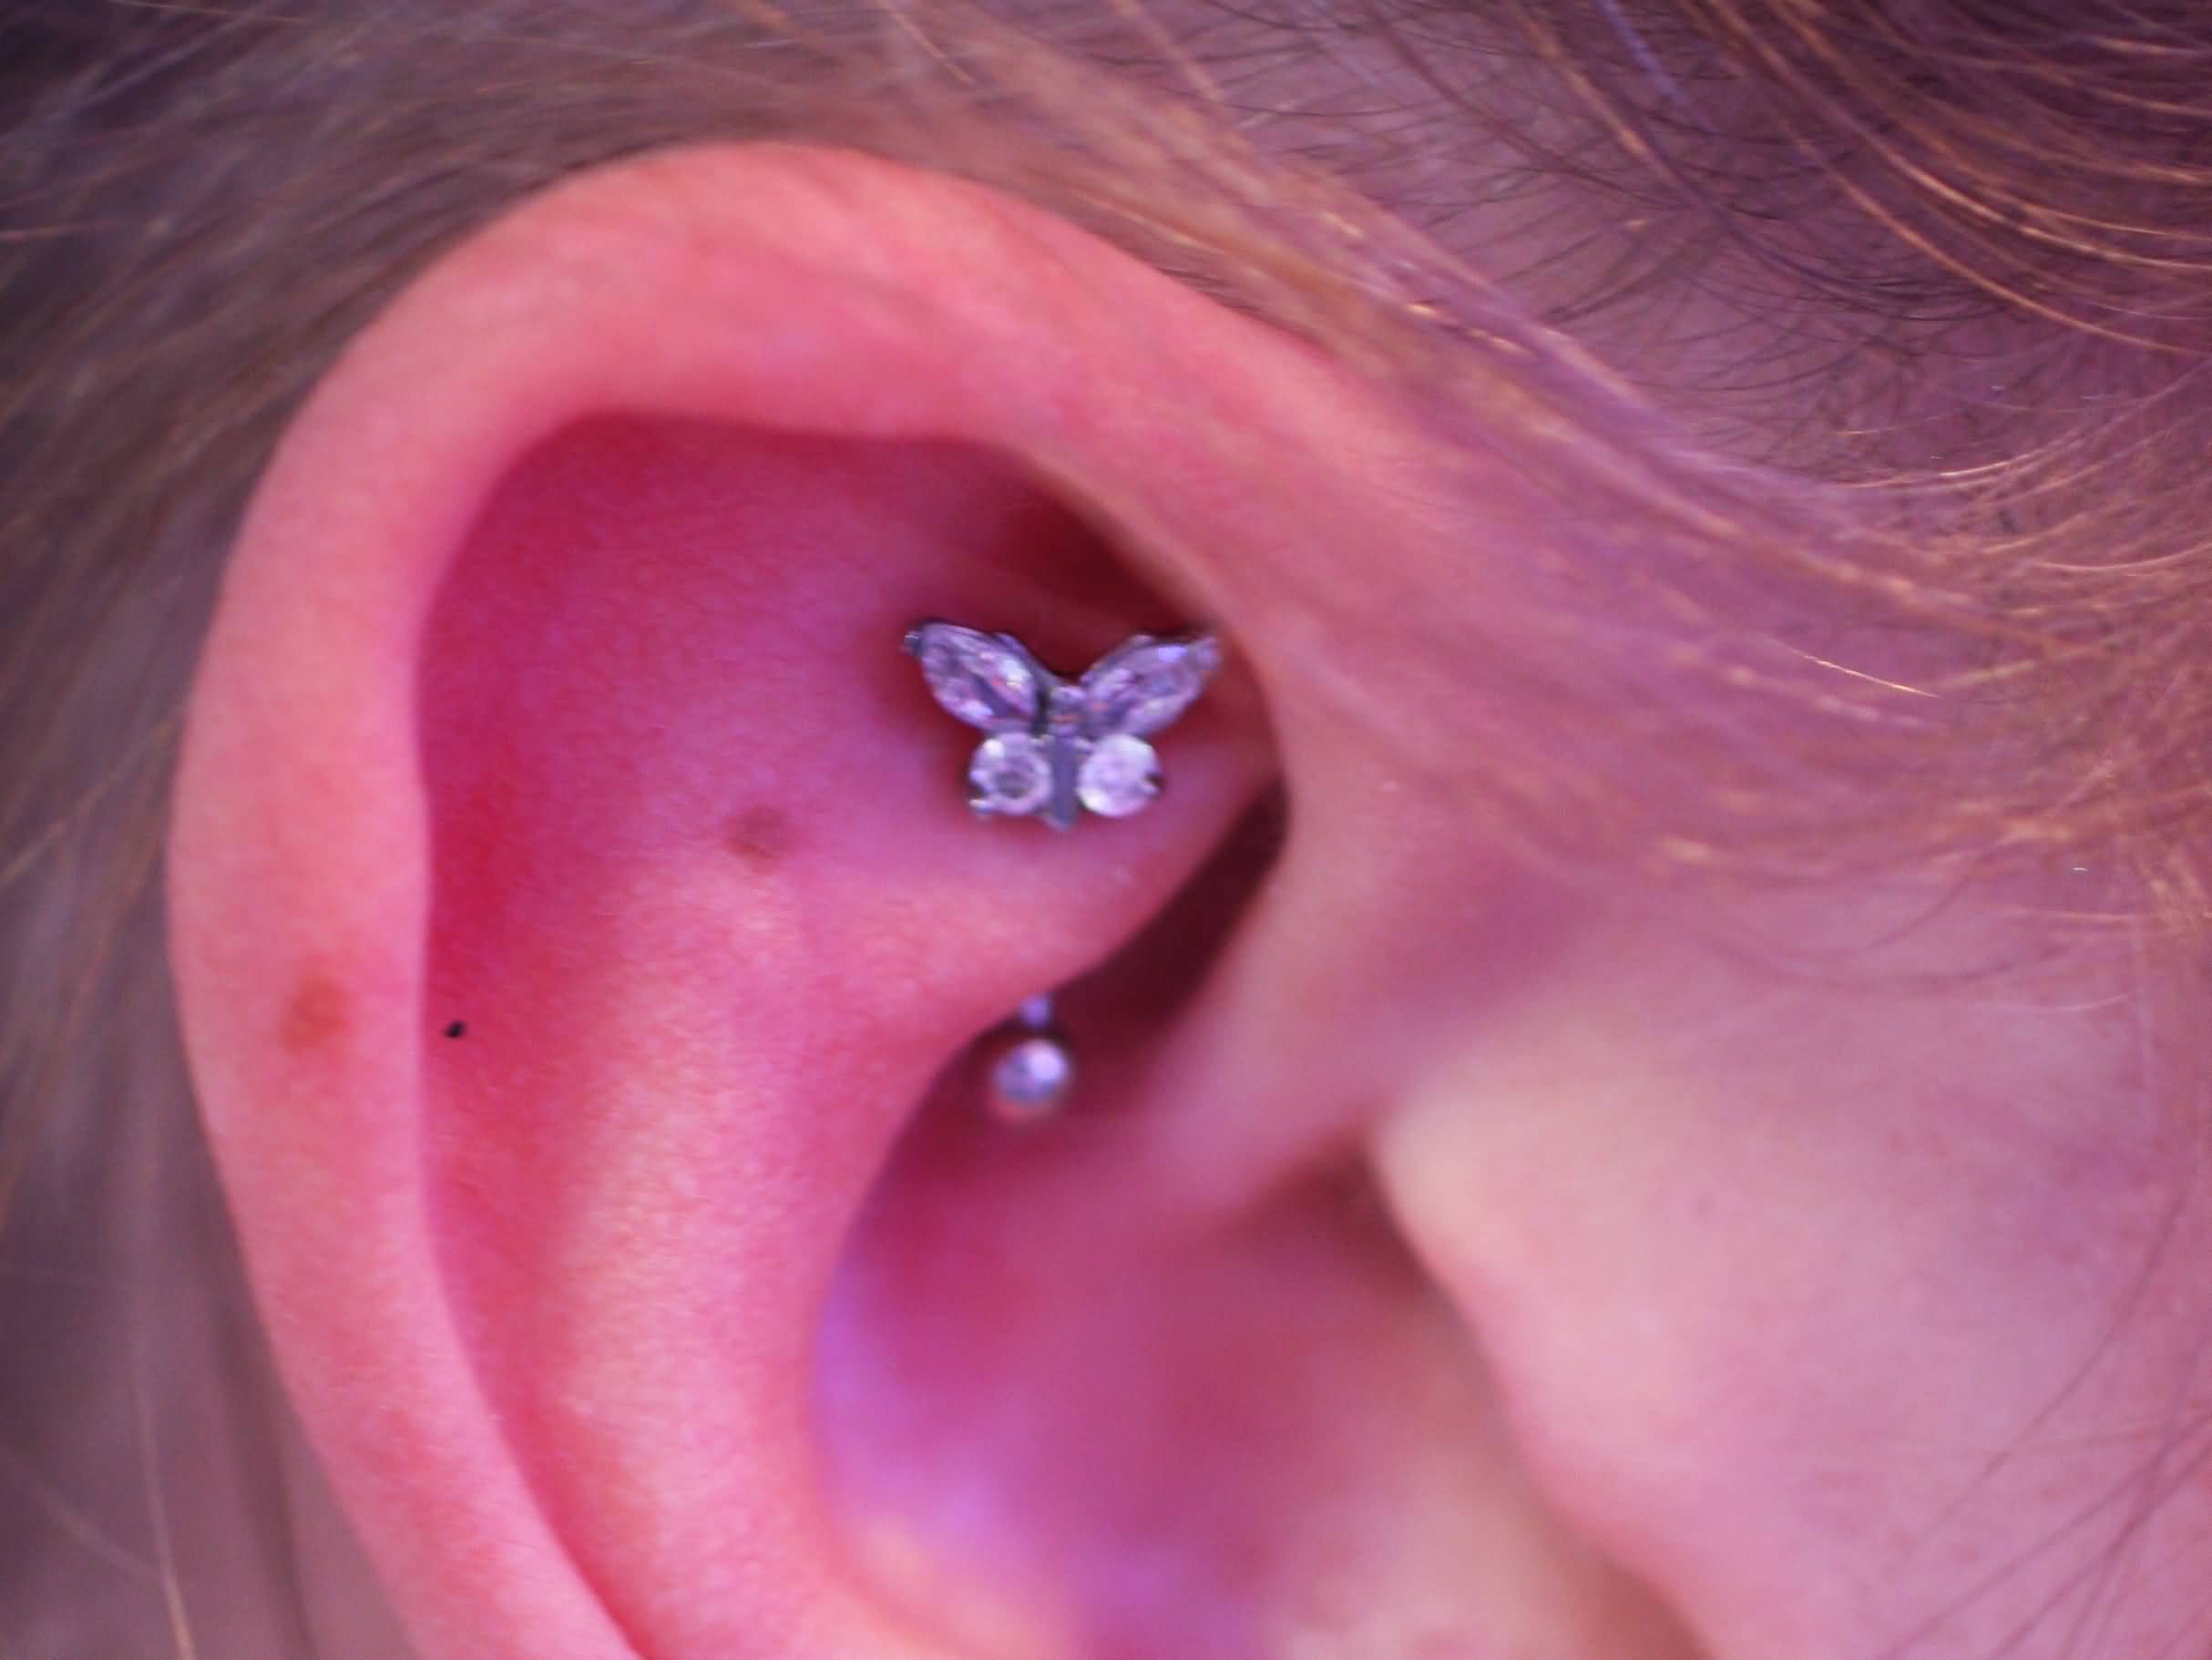 Rook Piercing With Butterfly Stud